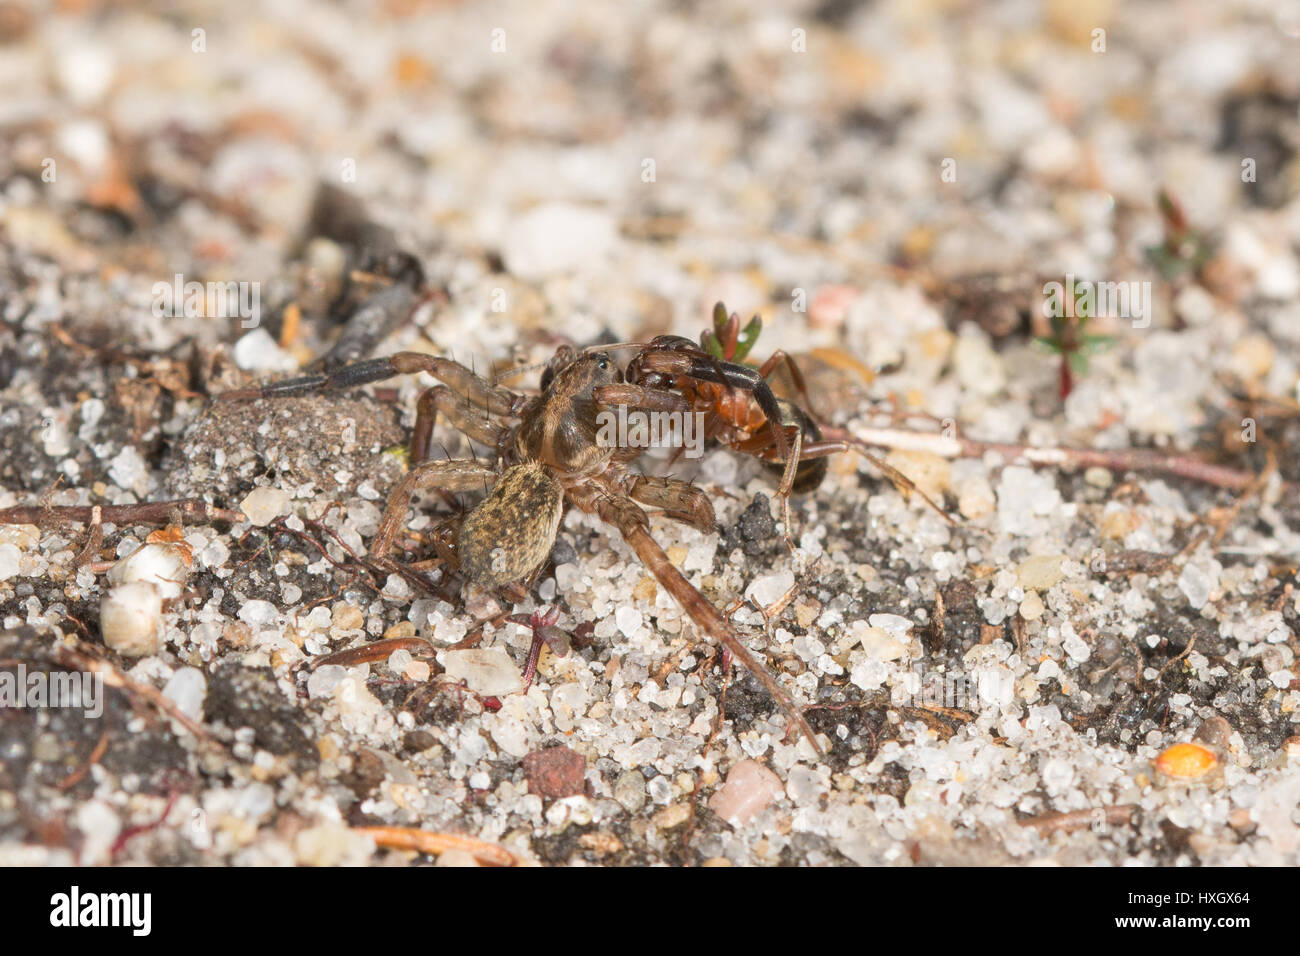 Wood ant pulling a dead spider along a sandy trace in Surrey, UK Stock Photo